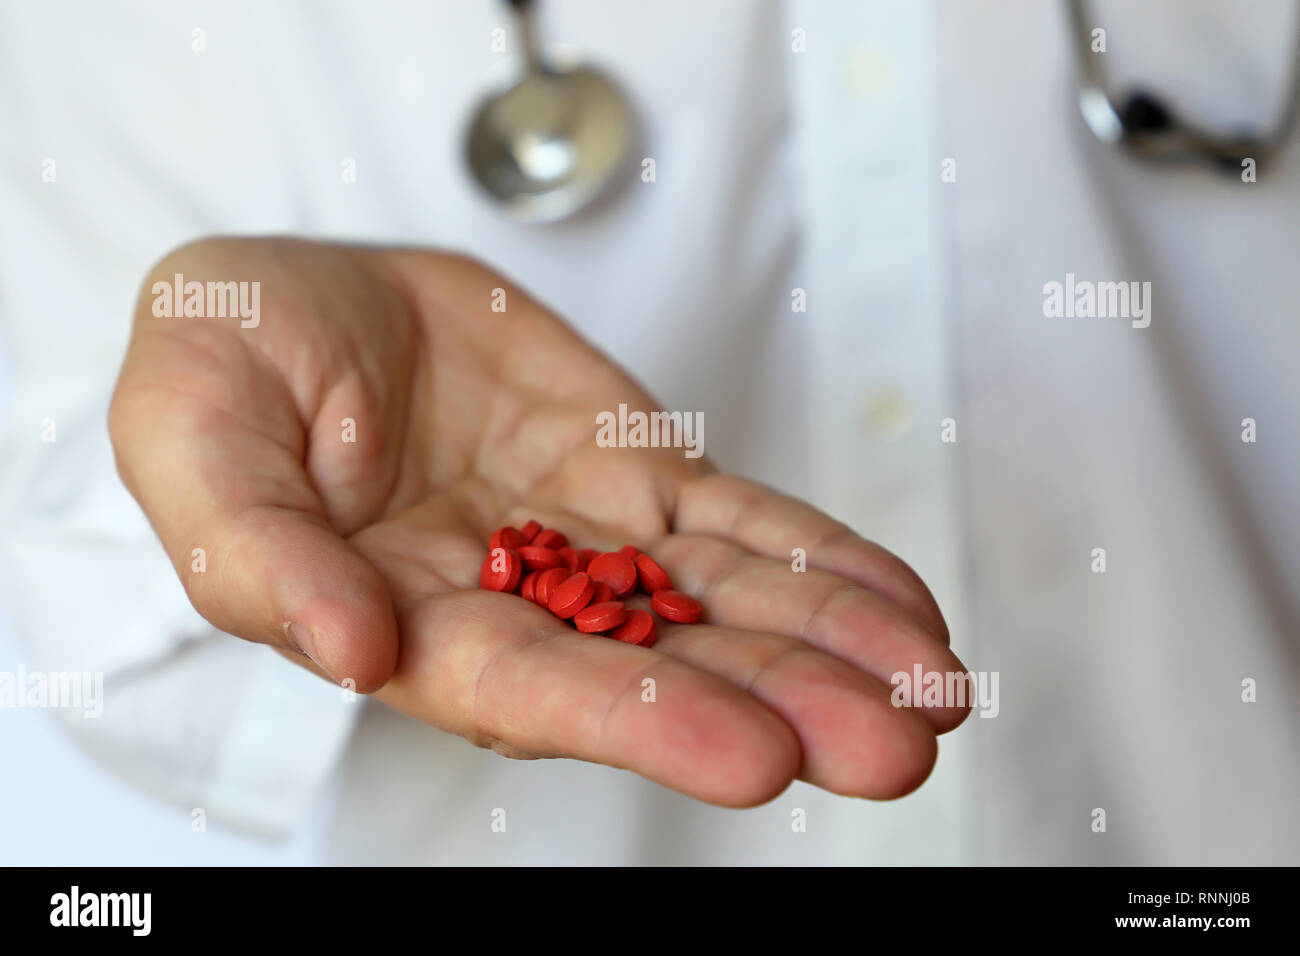 Doctor with red pills, man with stethoscope giving medication in capsules. Concept of medical prescription, dose of drugs, vitamins, pharmacy Stock Photo